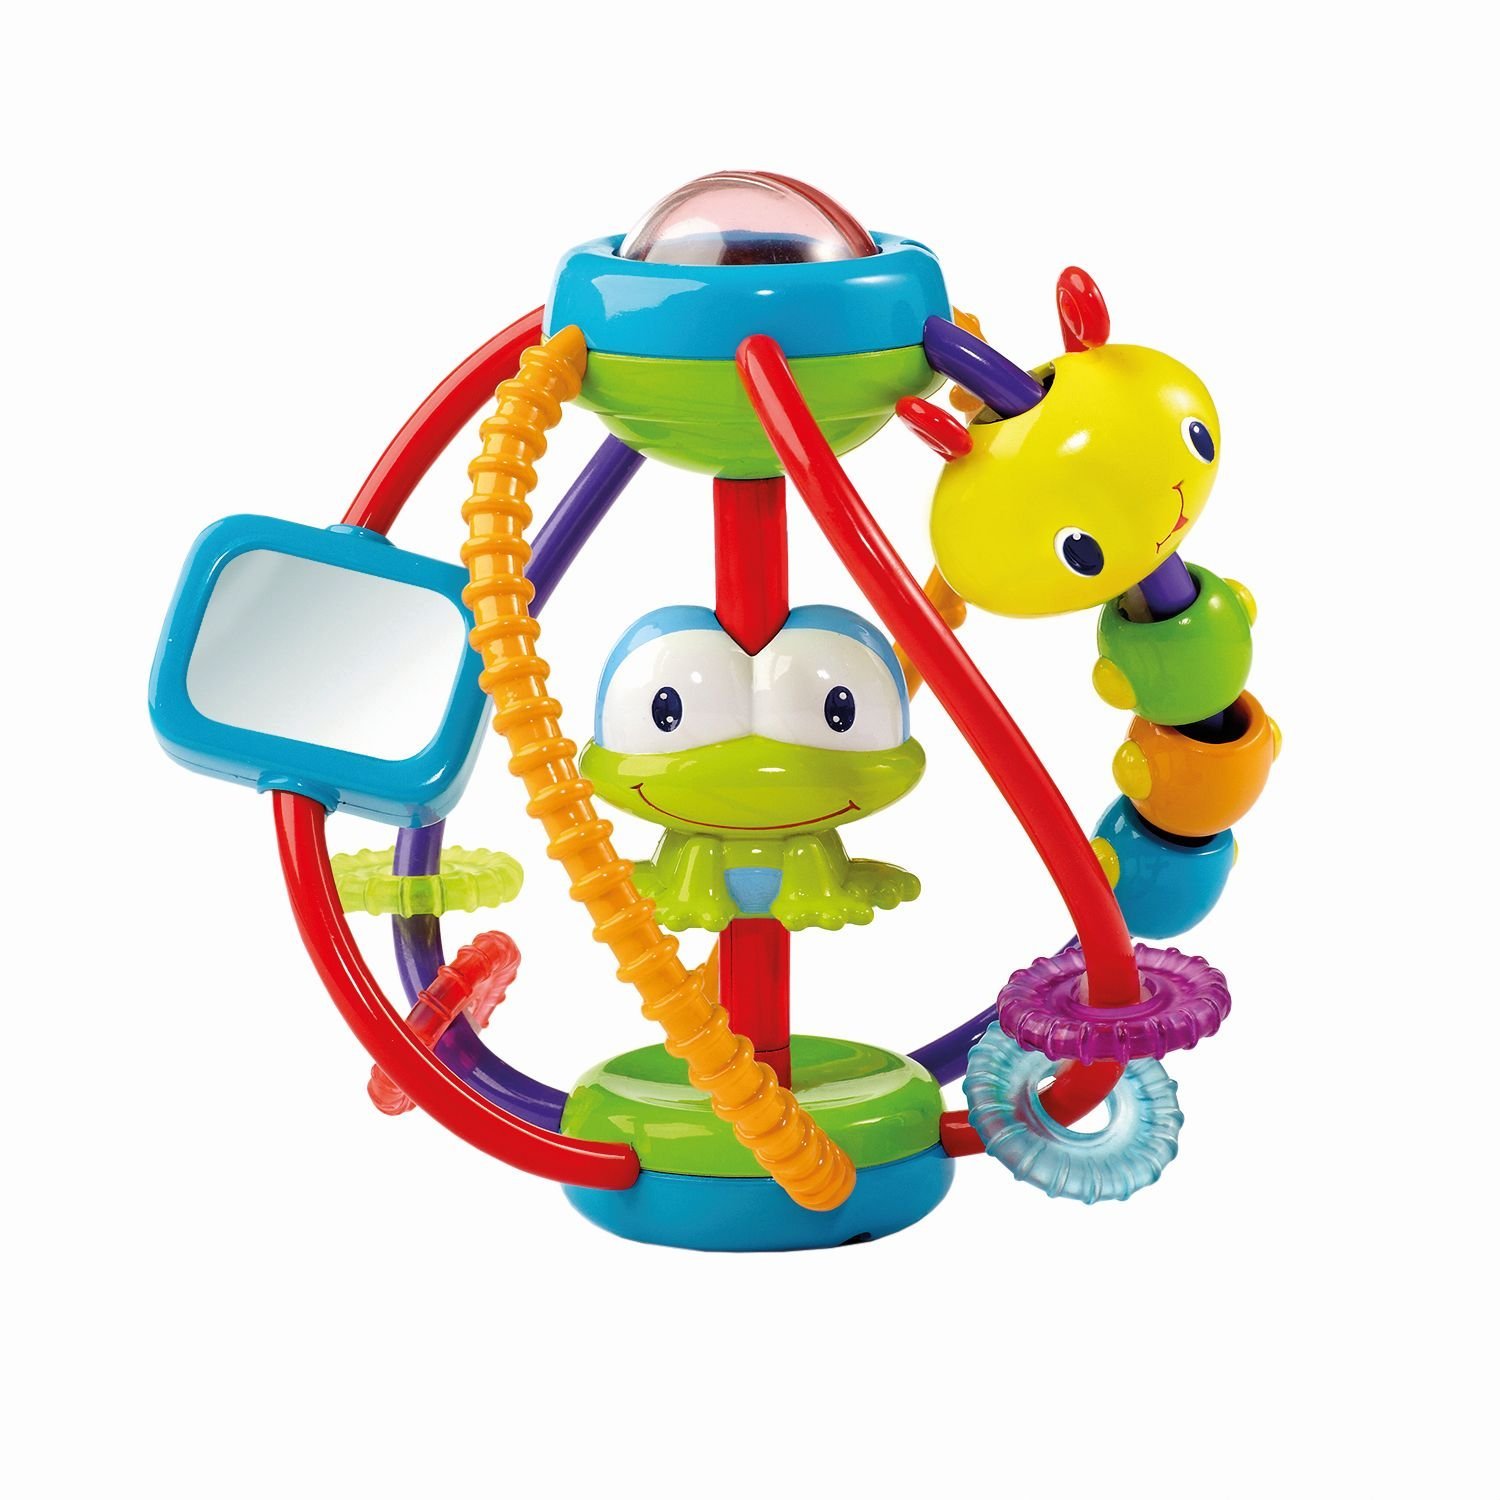 Bright Starts Clack and Slide Activity Ball Only $8.88 – 61% Savings